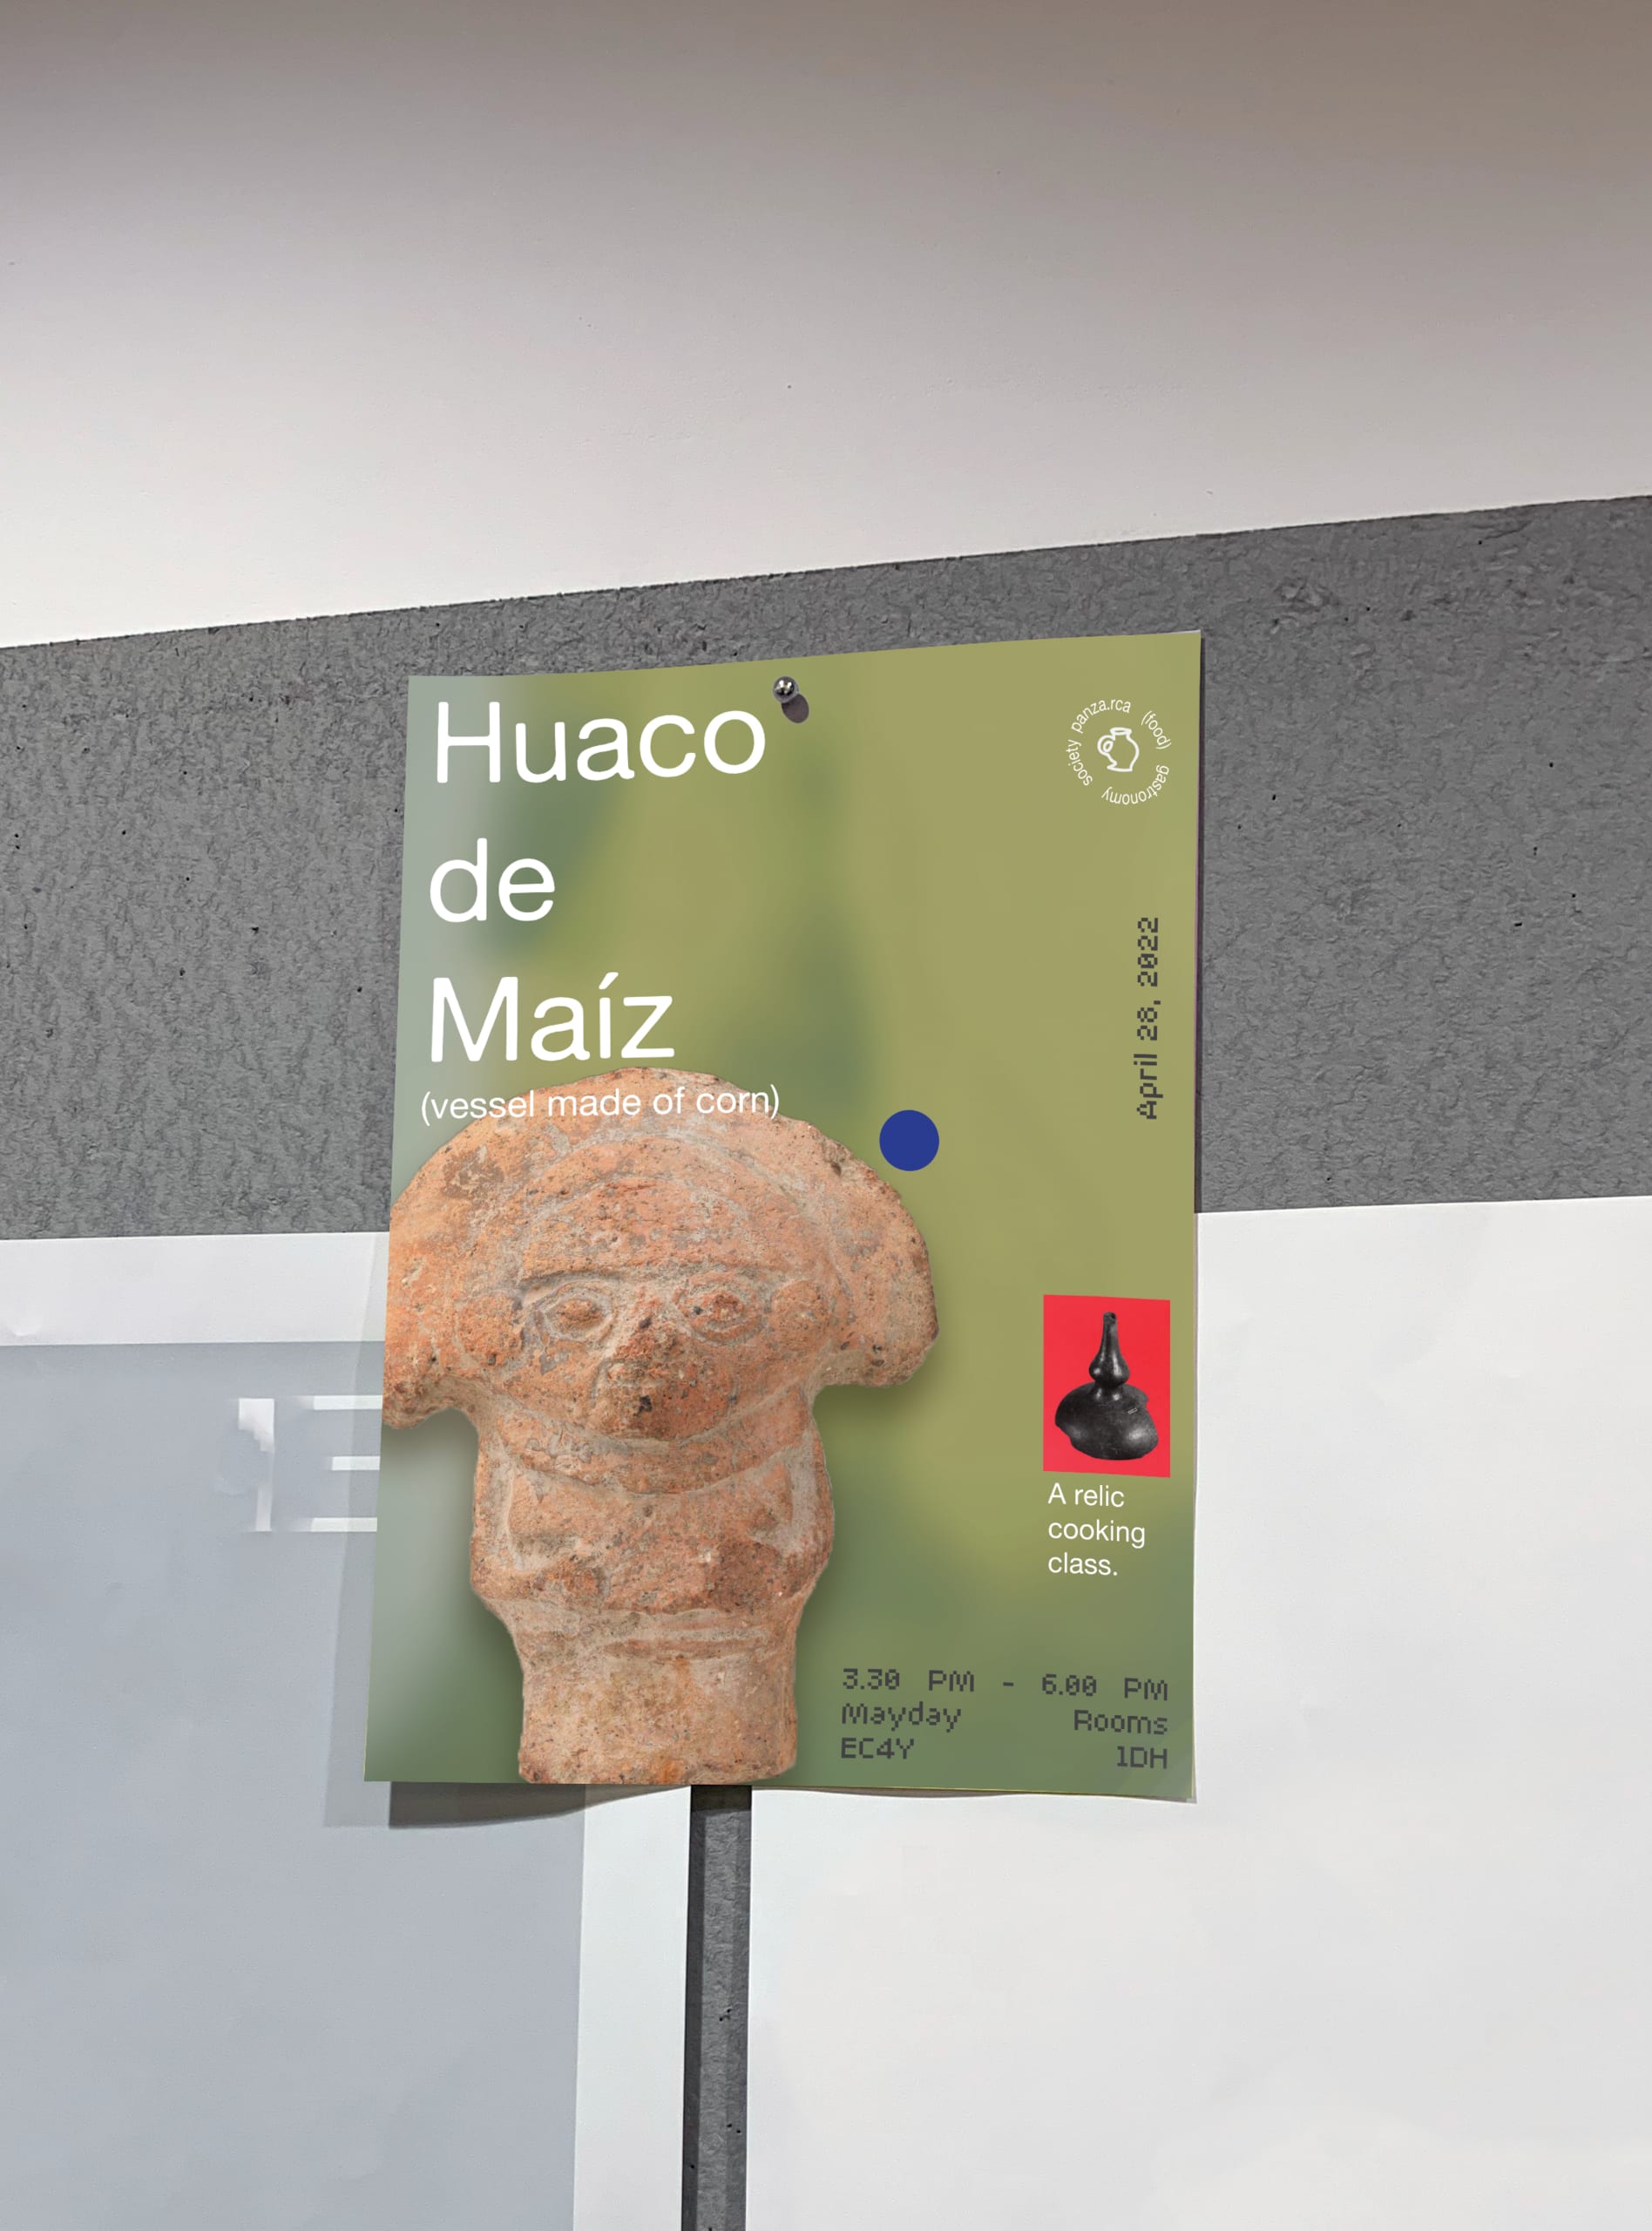 Huaco de Maíz poster installed at the RCA